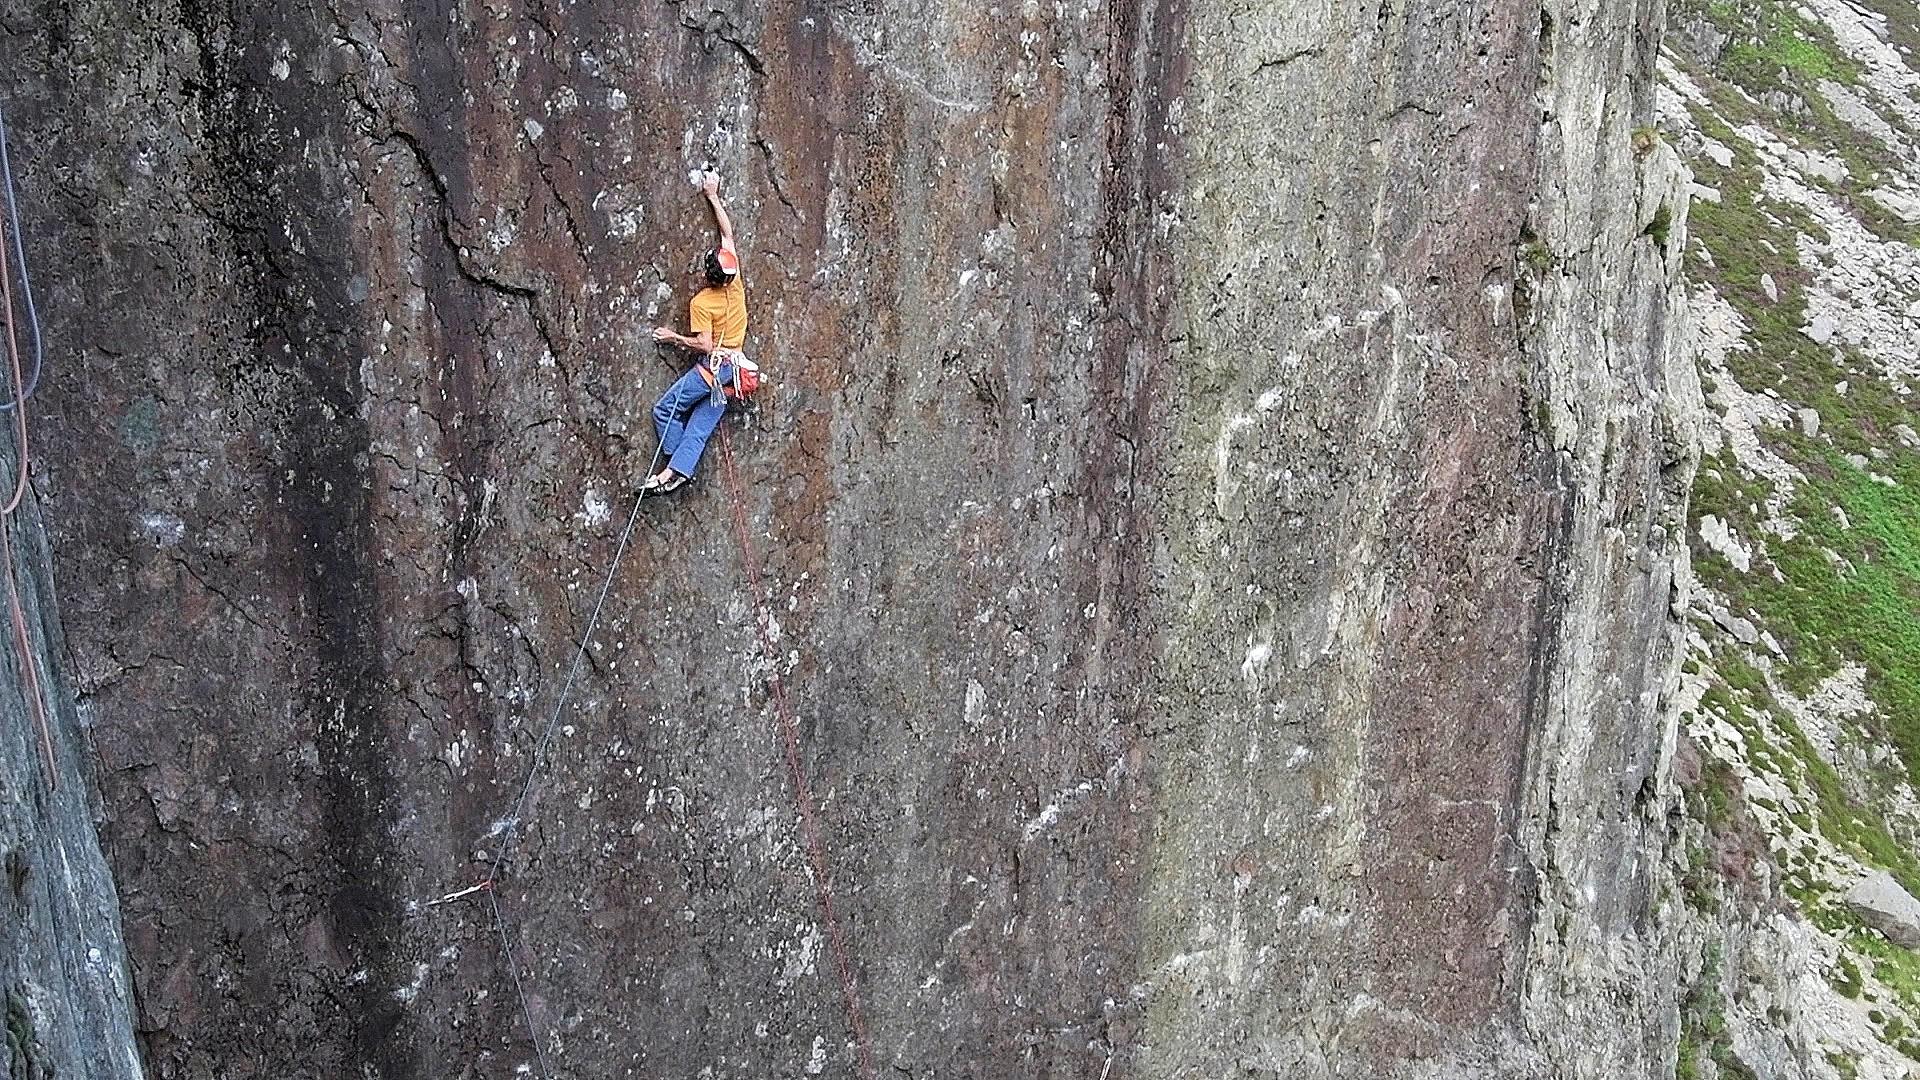 Steve runs it out and teeters up the technical final moves of Nightmayer E8 6c.  © Keith Sharples